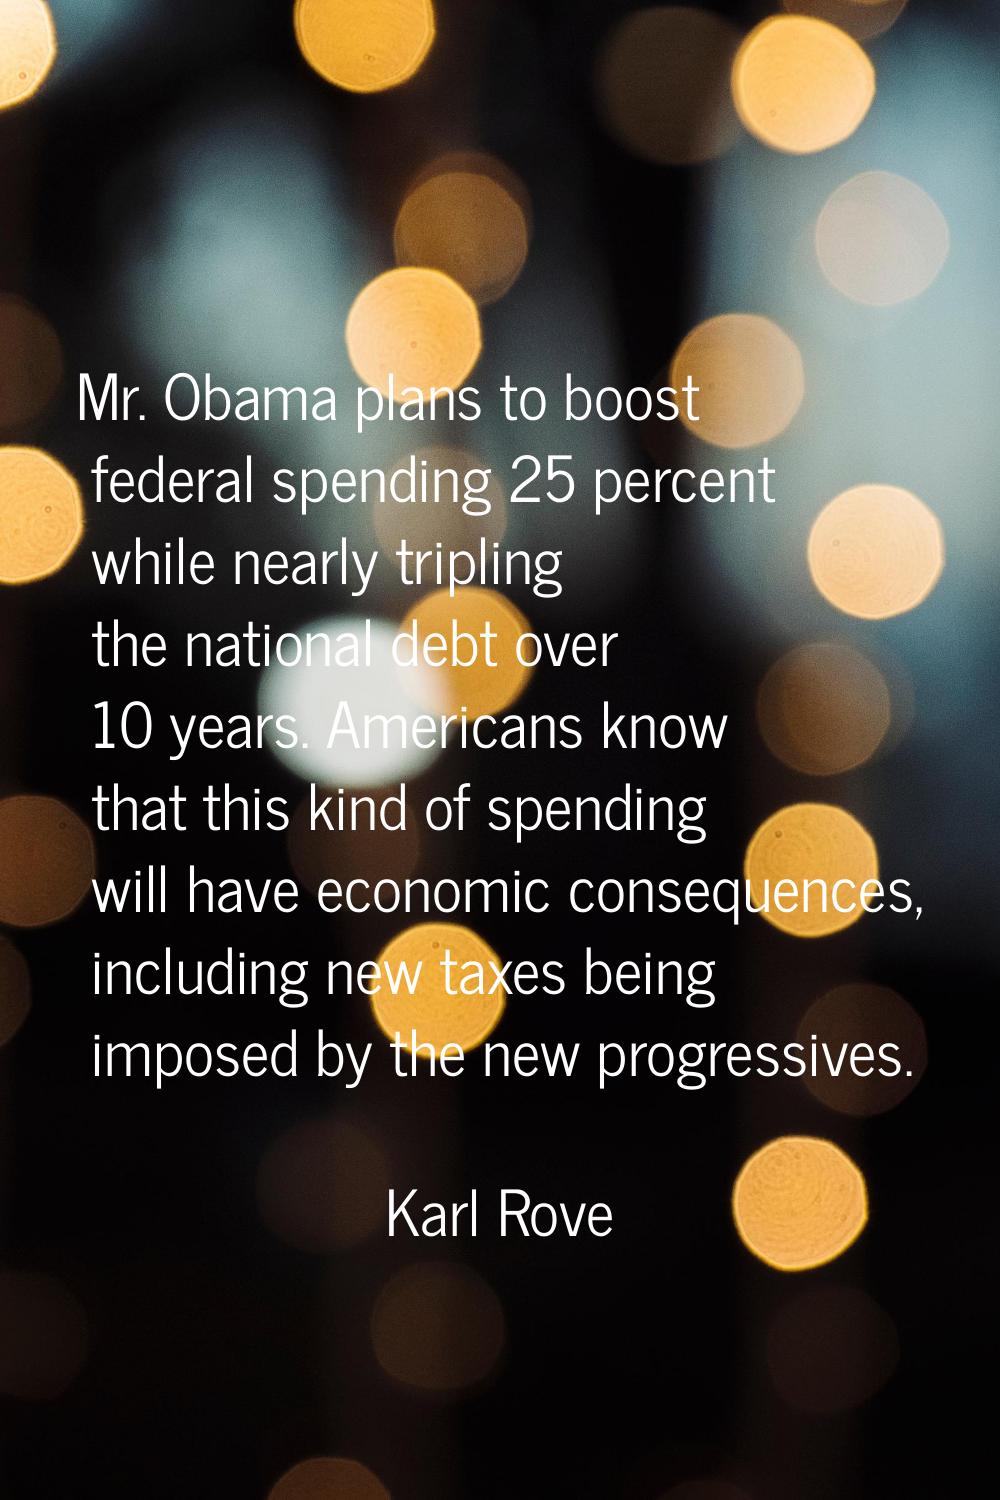 Mr. Obama plans to boost federal spending 25 percent while nearly tripling the national debt over 1